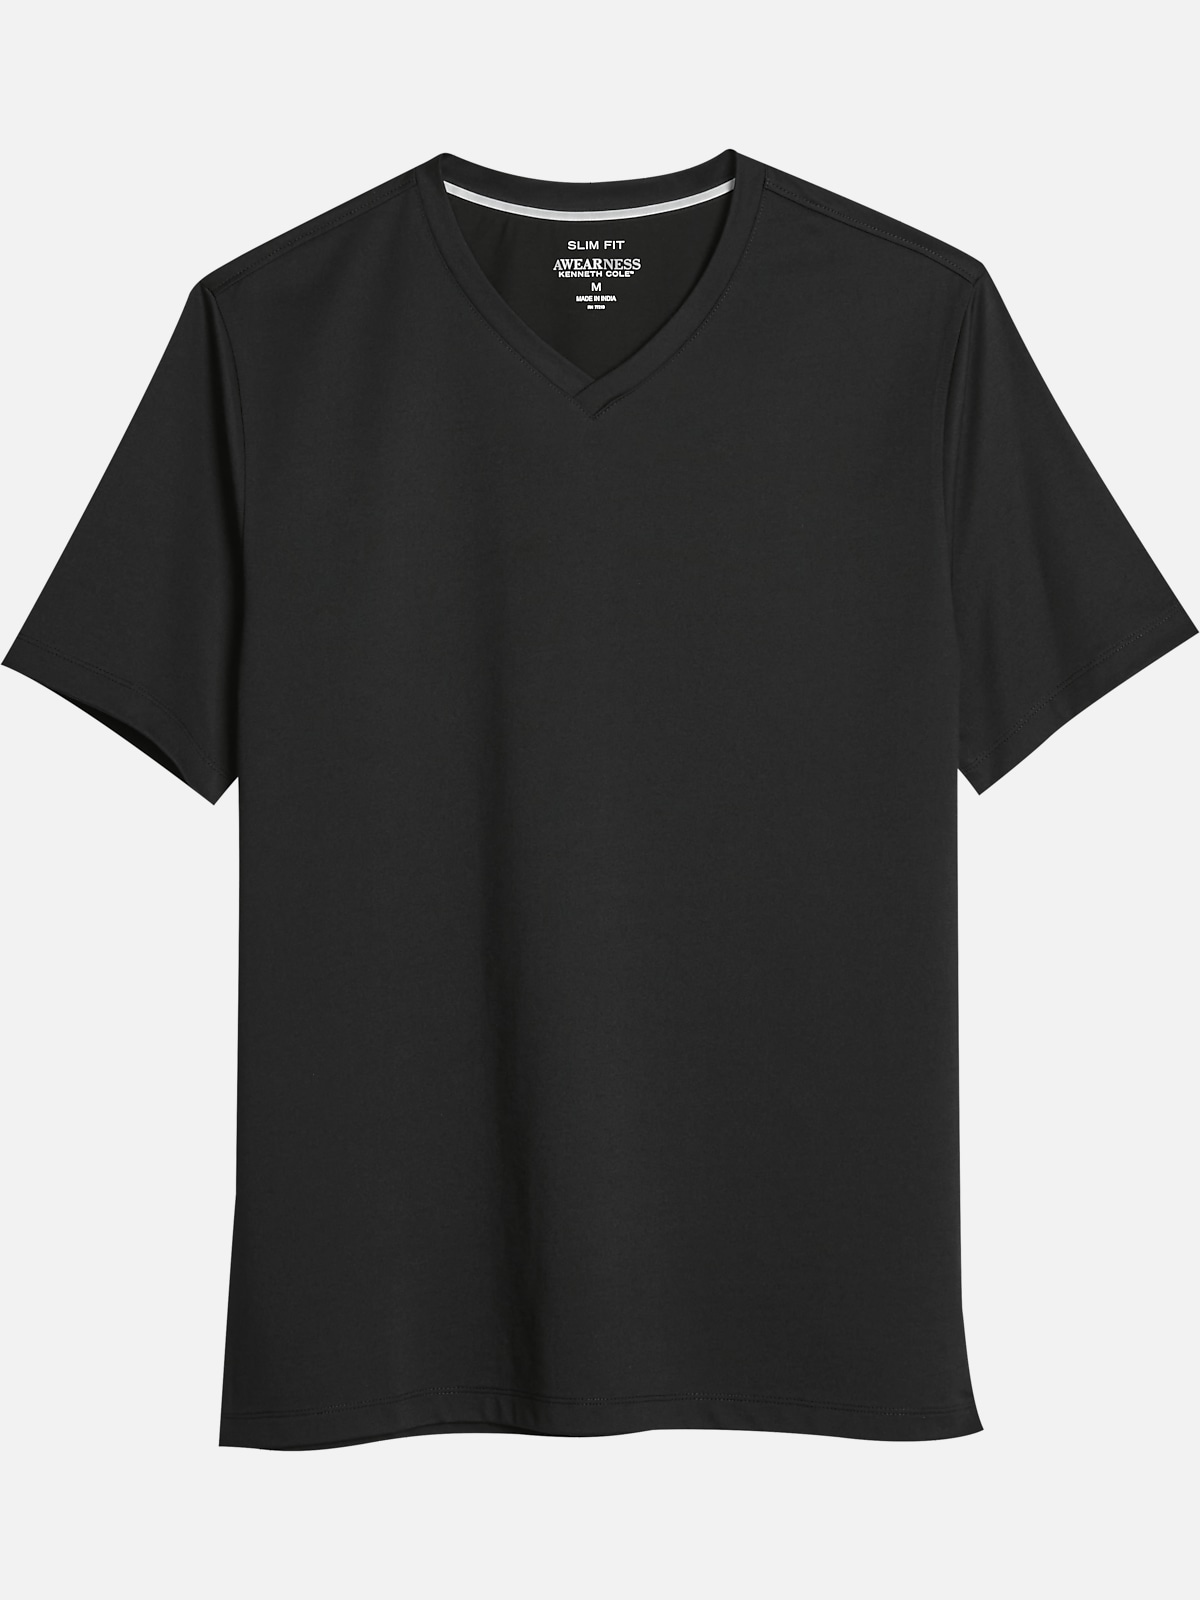 Awearness Kenneth Cole Slim Fit Performance Tech V-Neck Tee | All ...